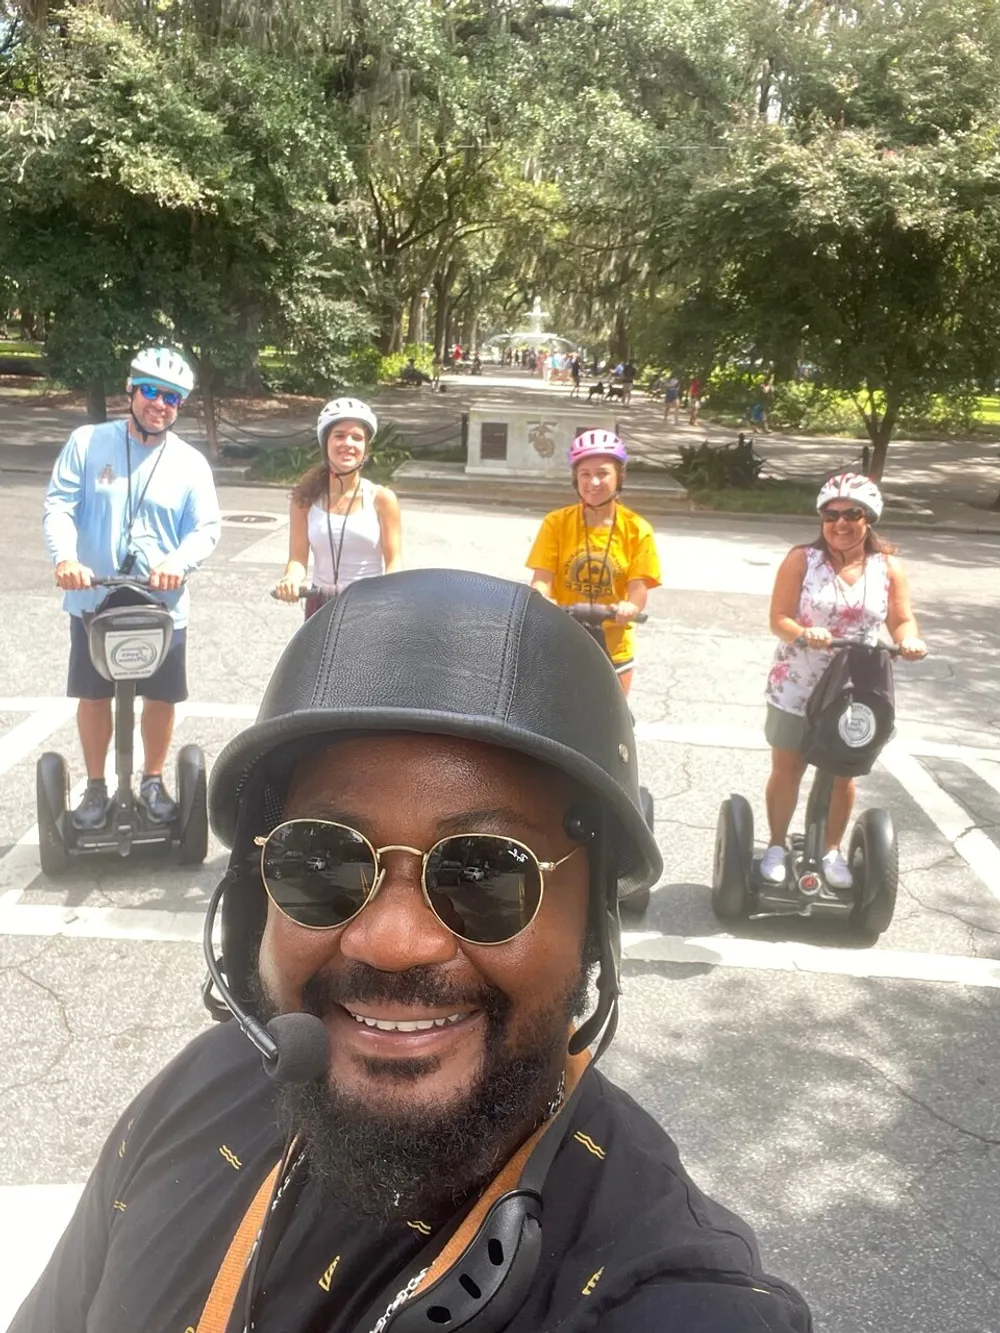 A group of people with one taking a selfie wearing helmets and riding Segways on a tree-lined street